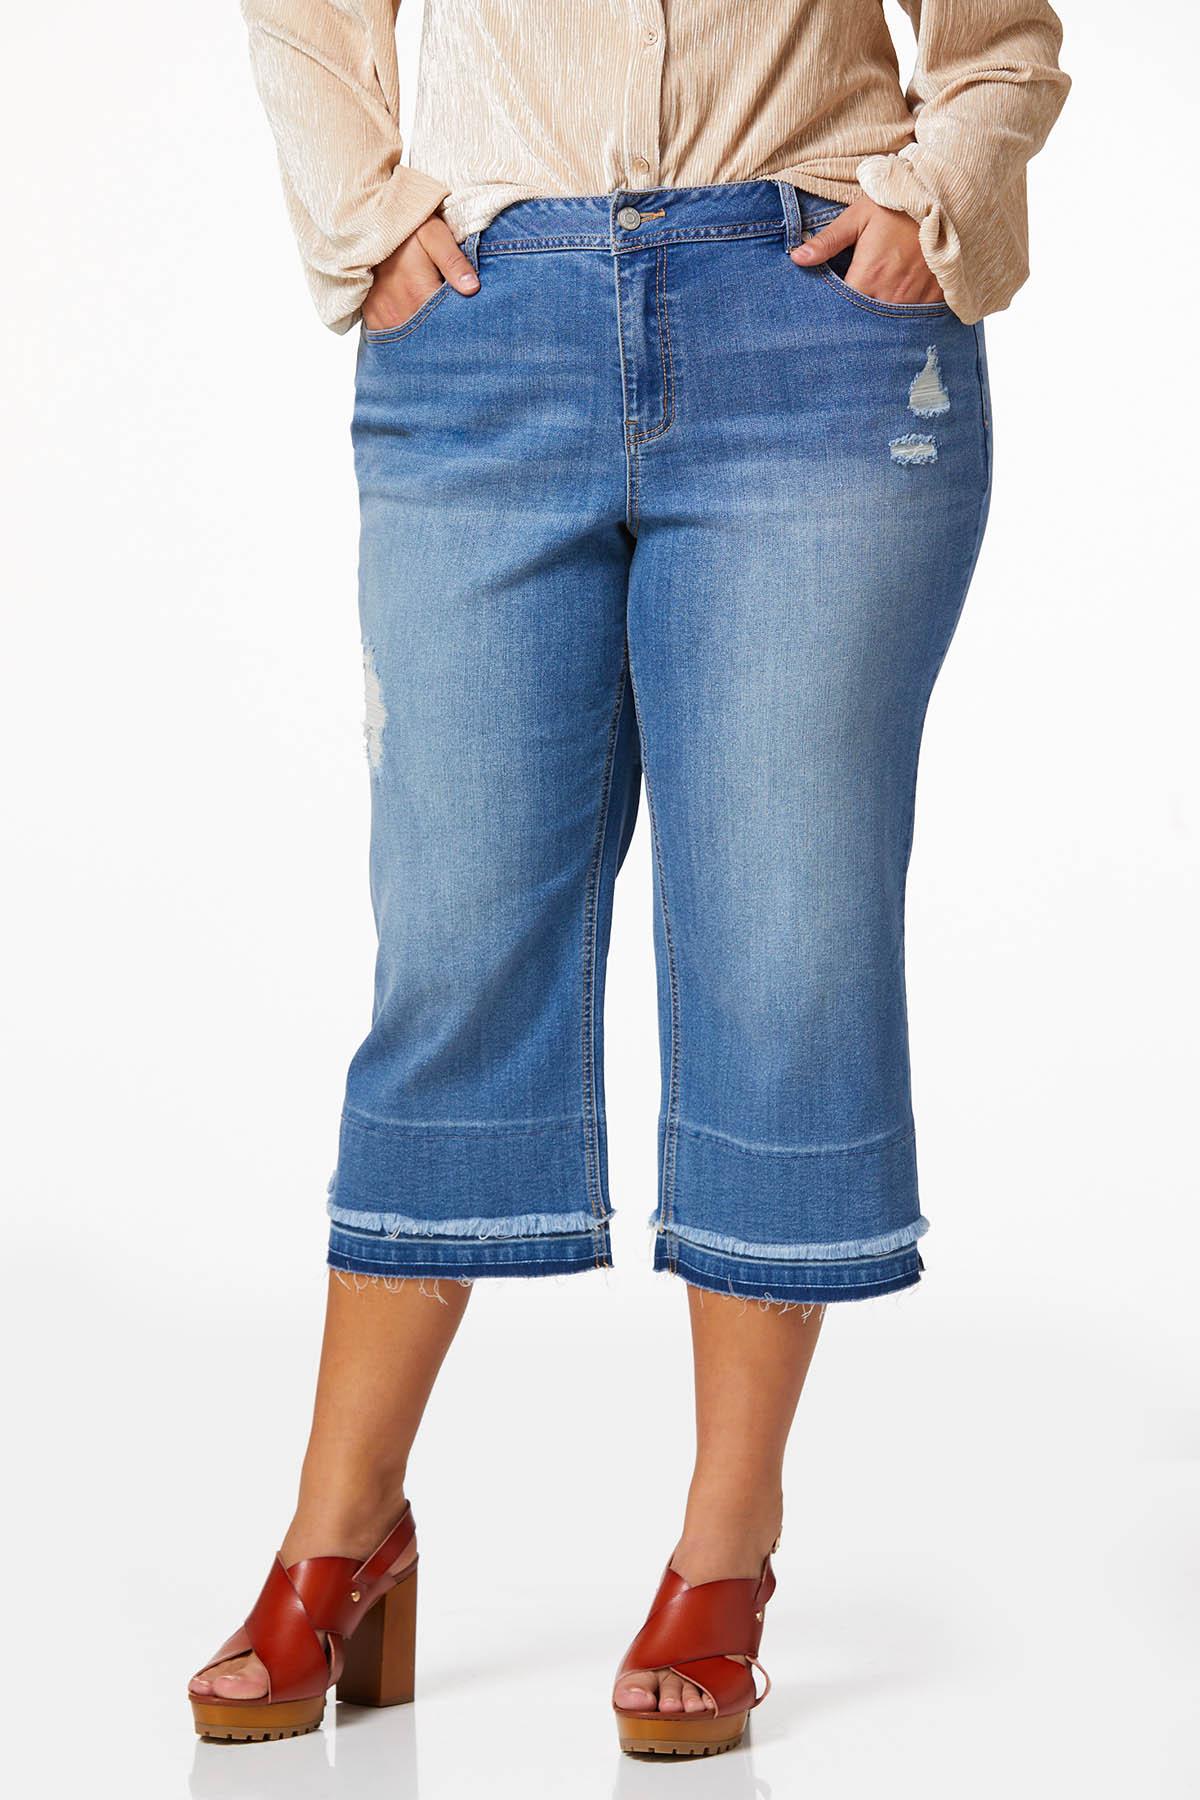 Cato Fashions  Cato Plus Size Cropped Layered Frayed Jeans